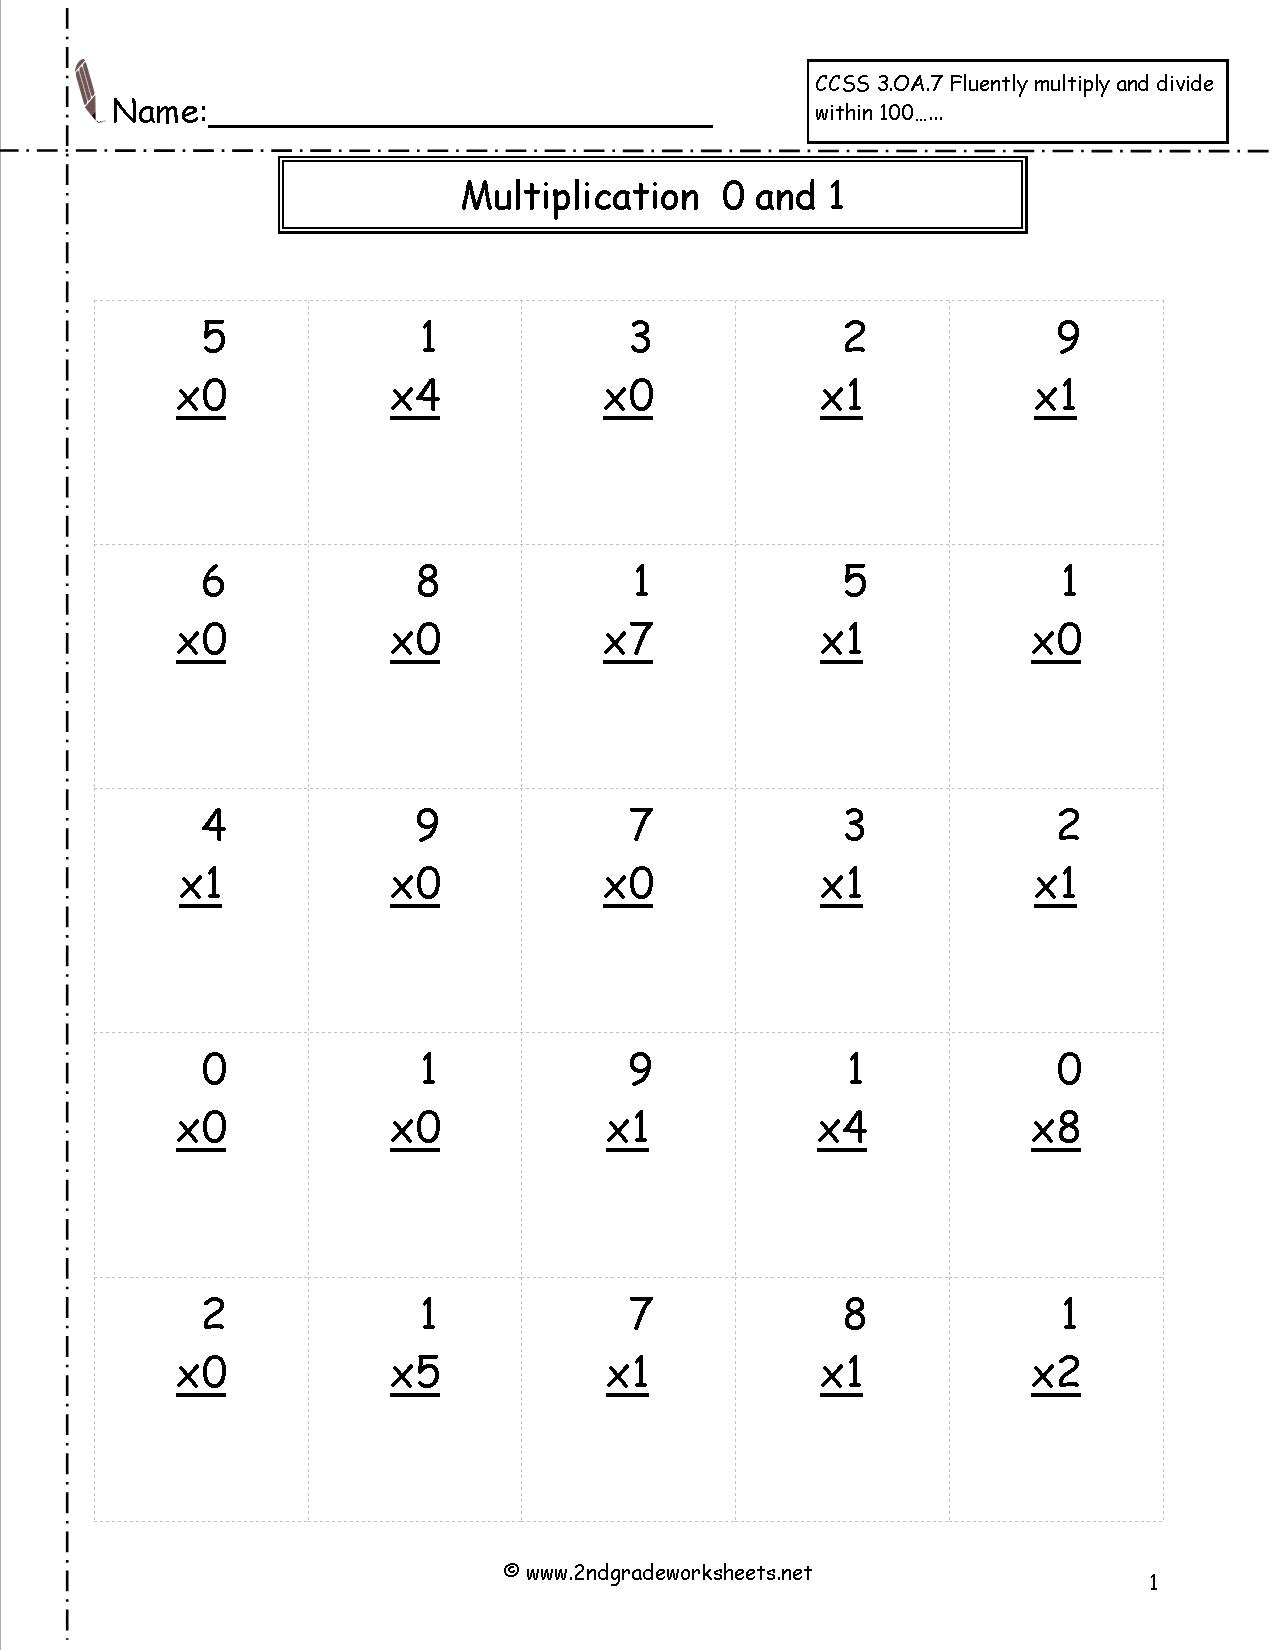 Multiplication Worksheets And Printouts with regard to Multiplication Worksheets Of 2